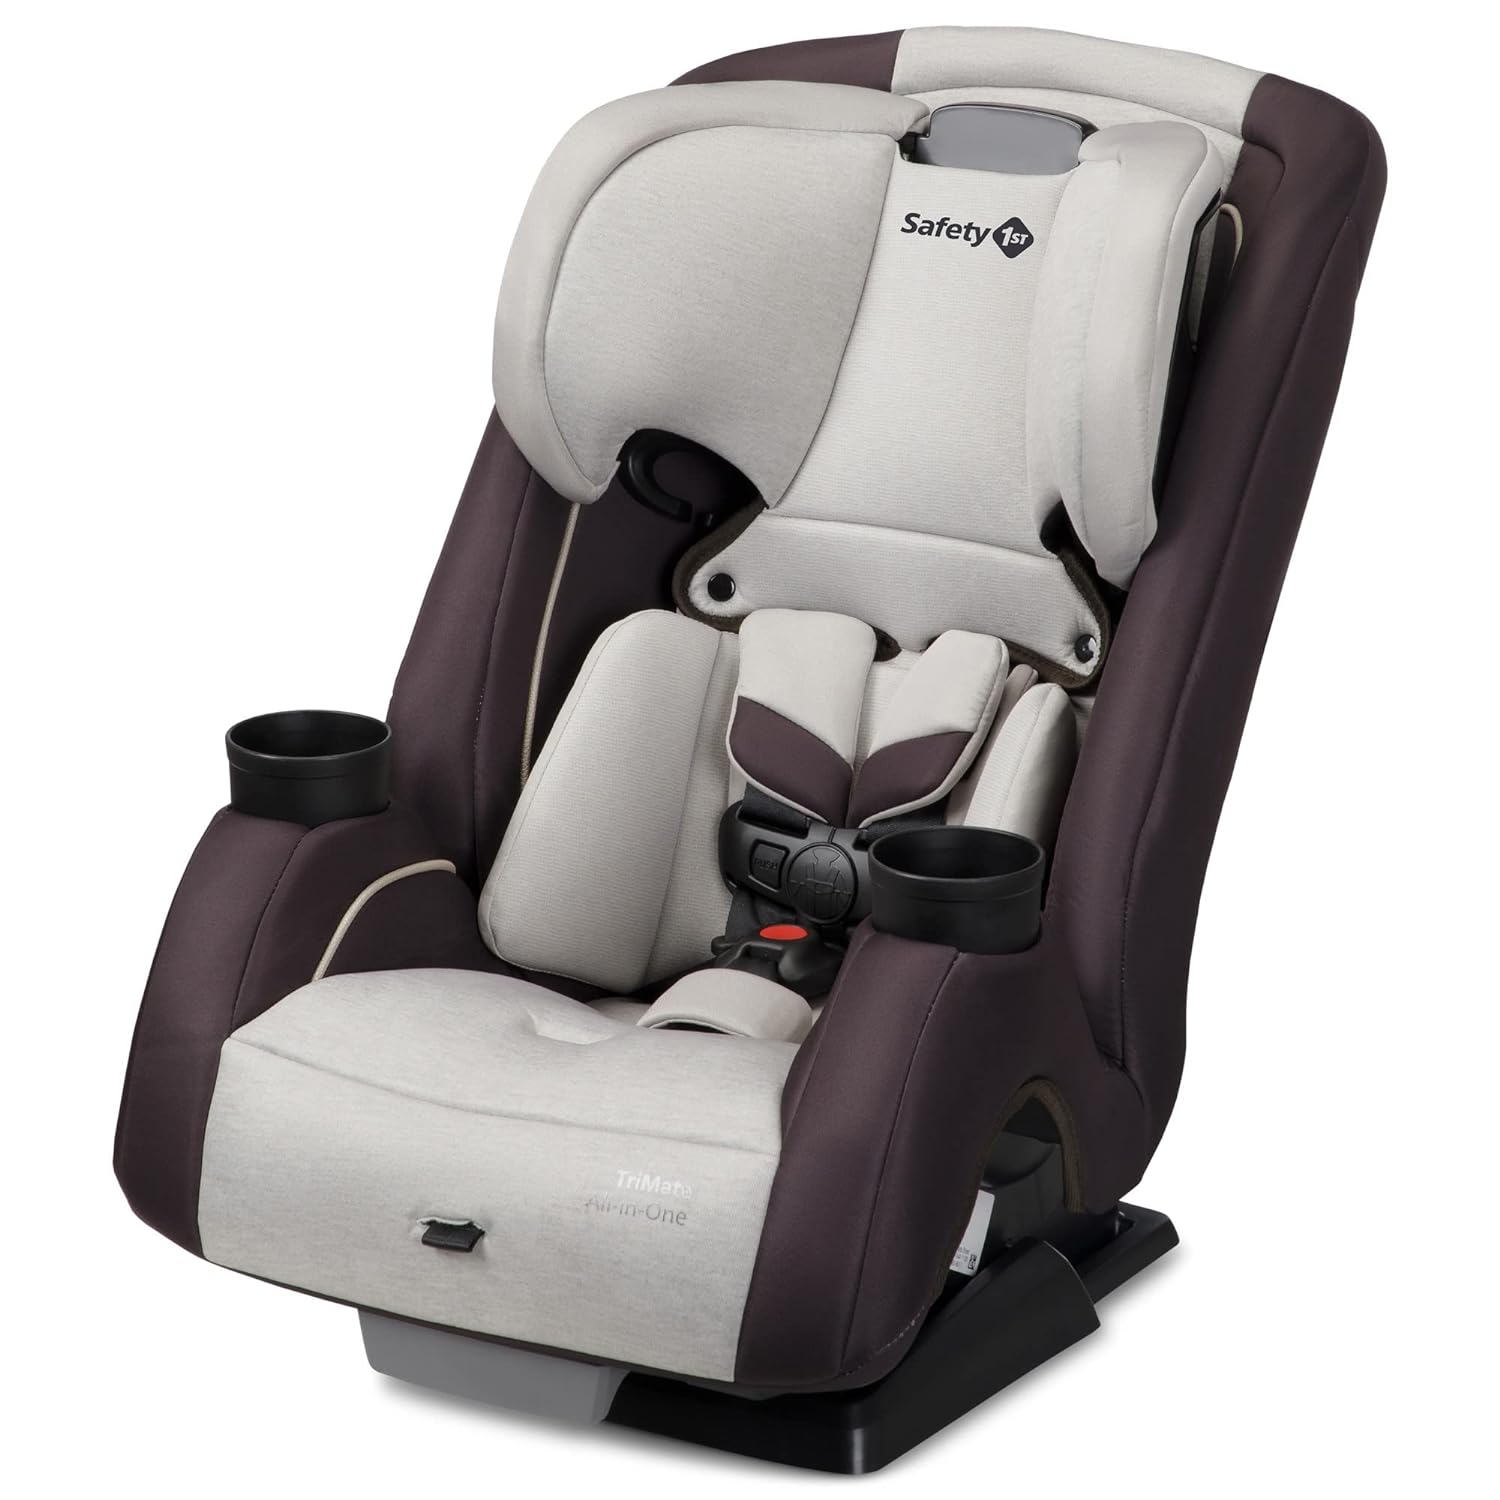 Safety 1st TriMate All-in-One Car Seat